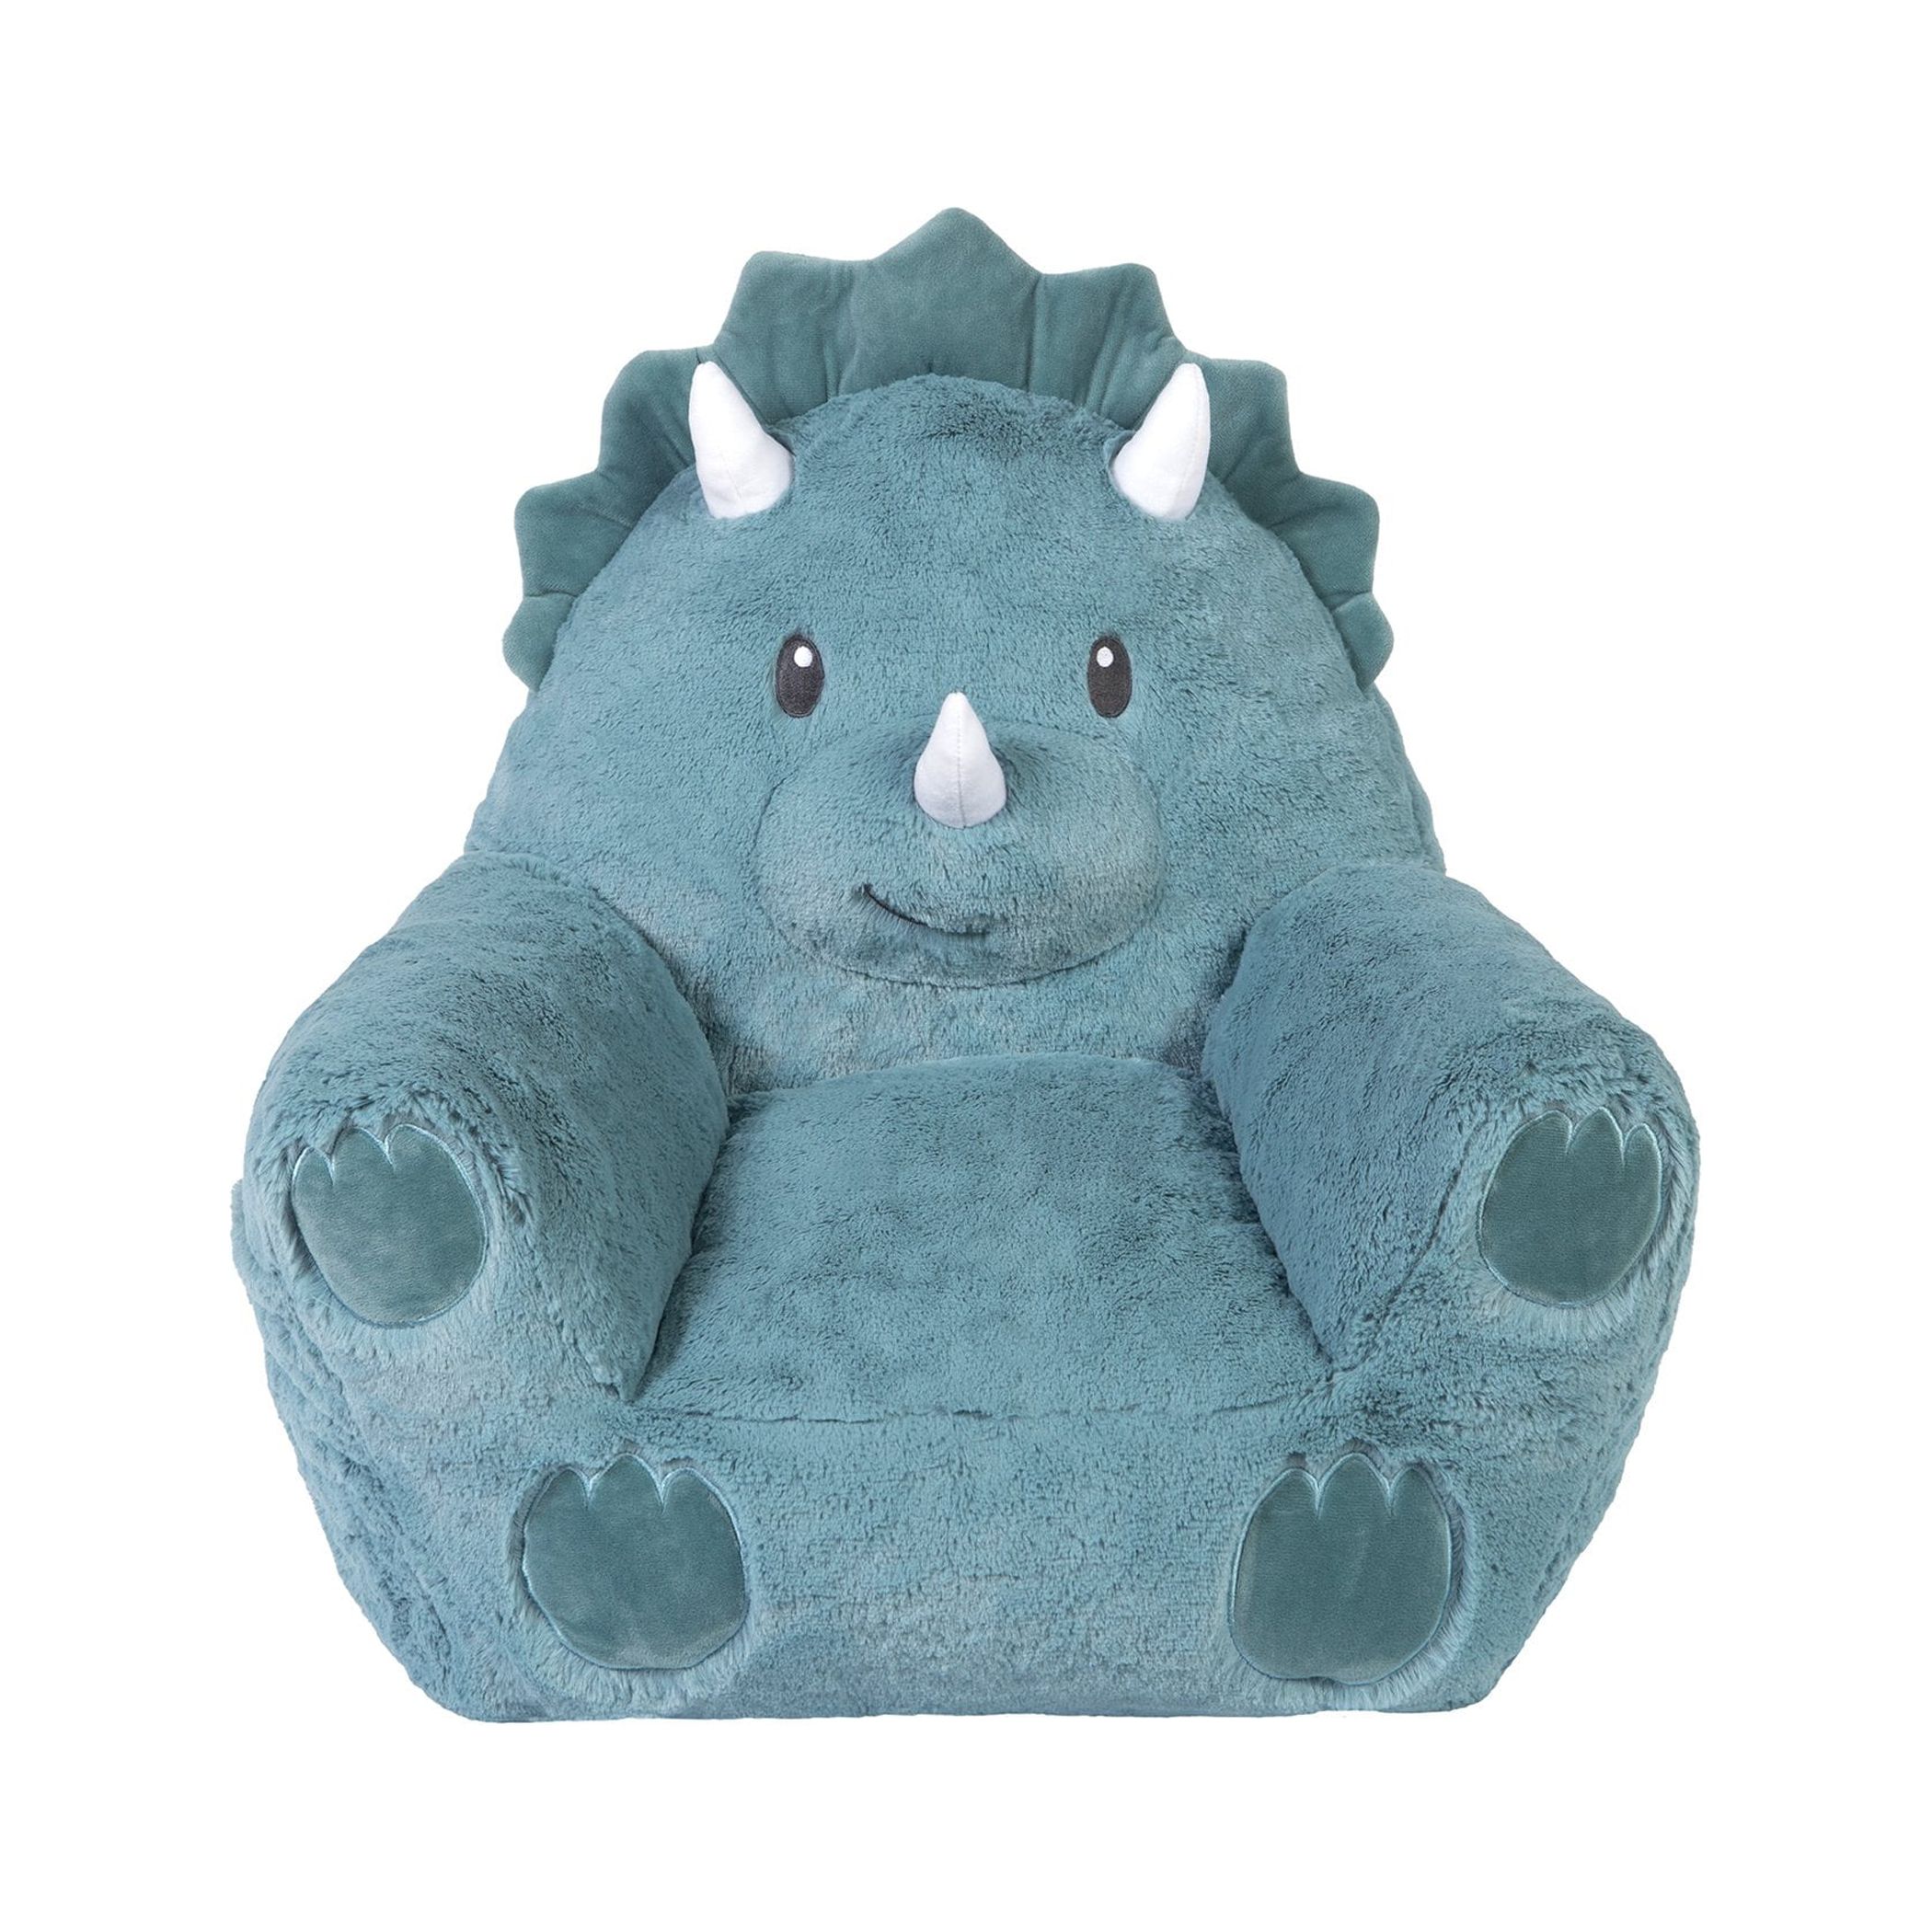 Cuddo Buddies® Unisex Toddler Dinosaur Plush Character Chair by Trend Lab - image 1 of 11